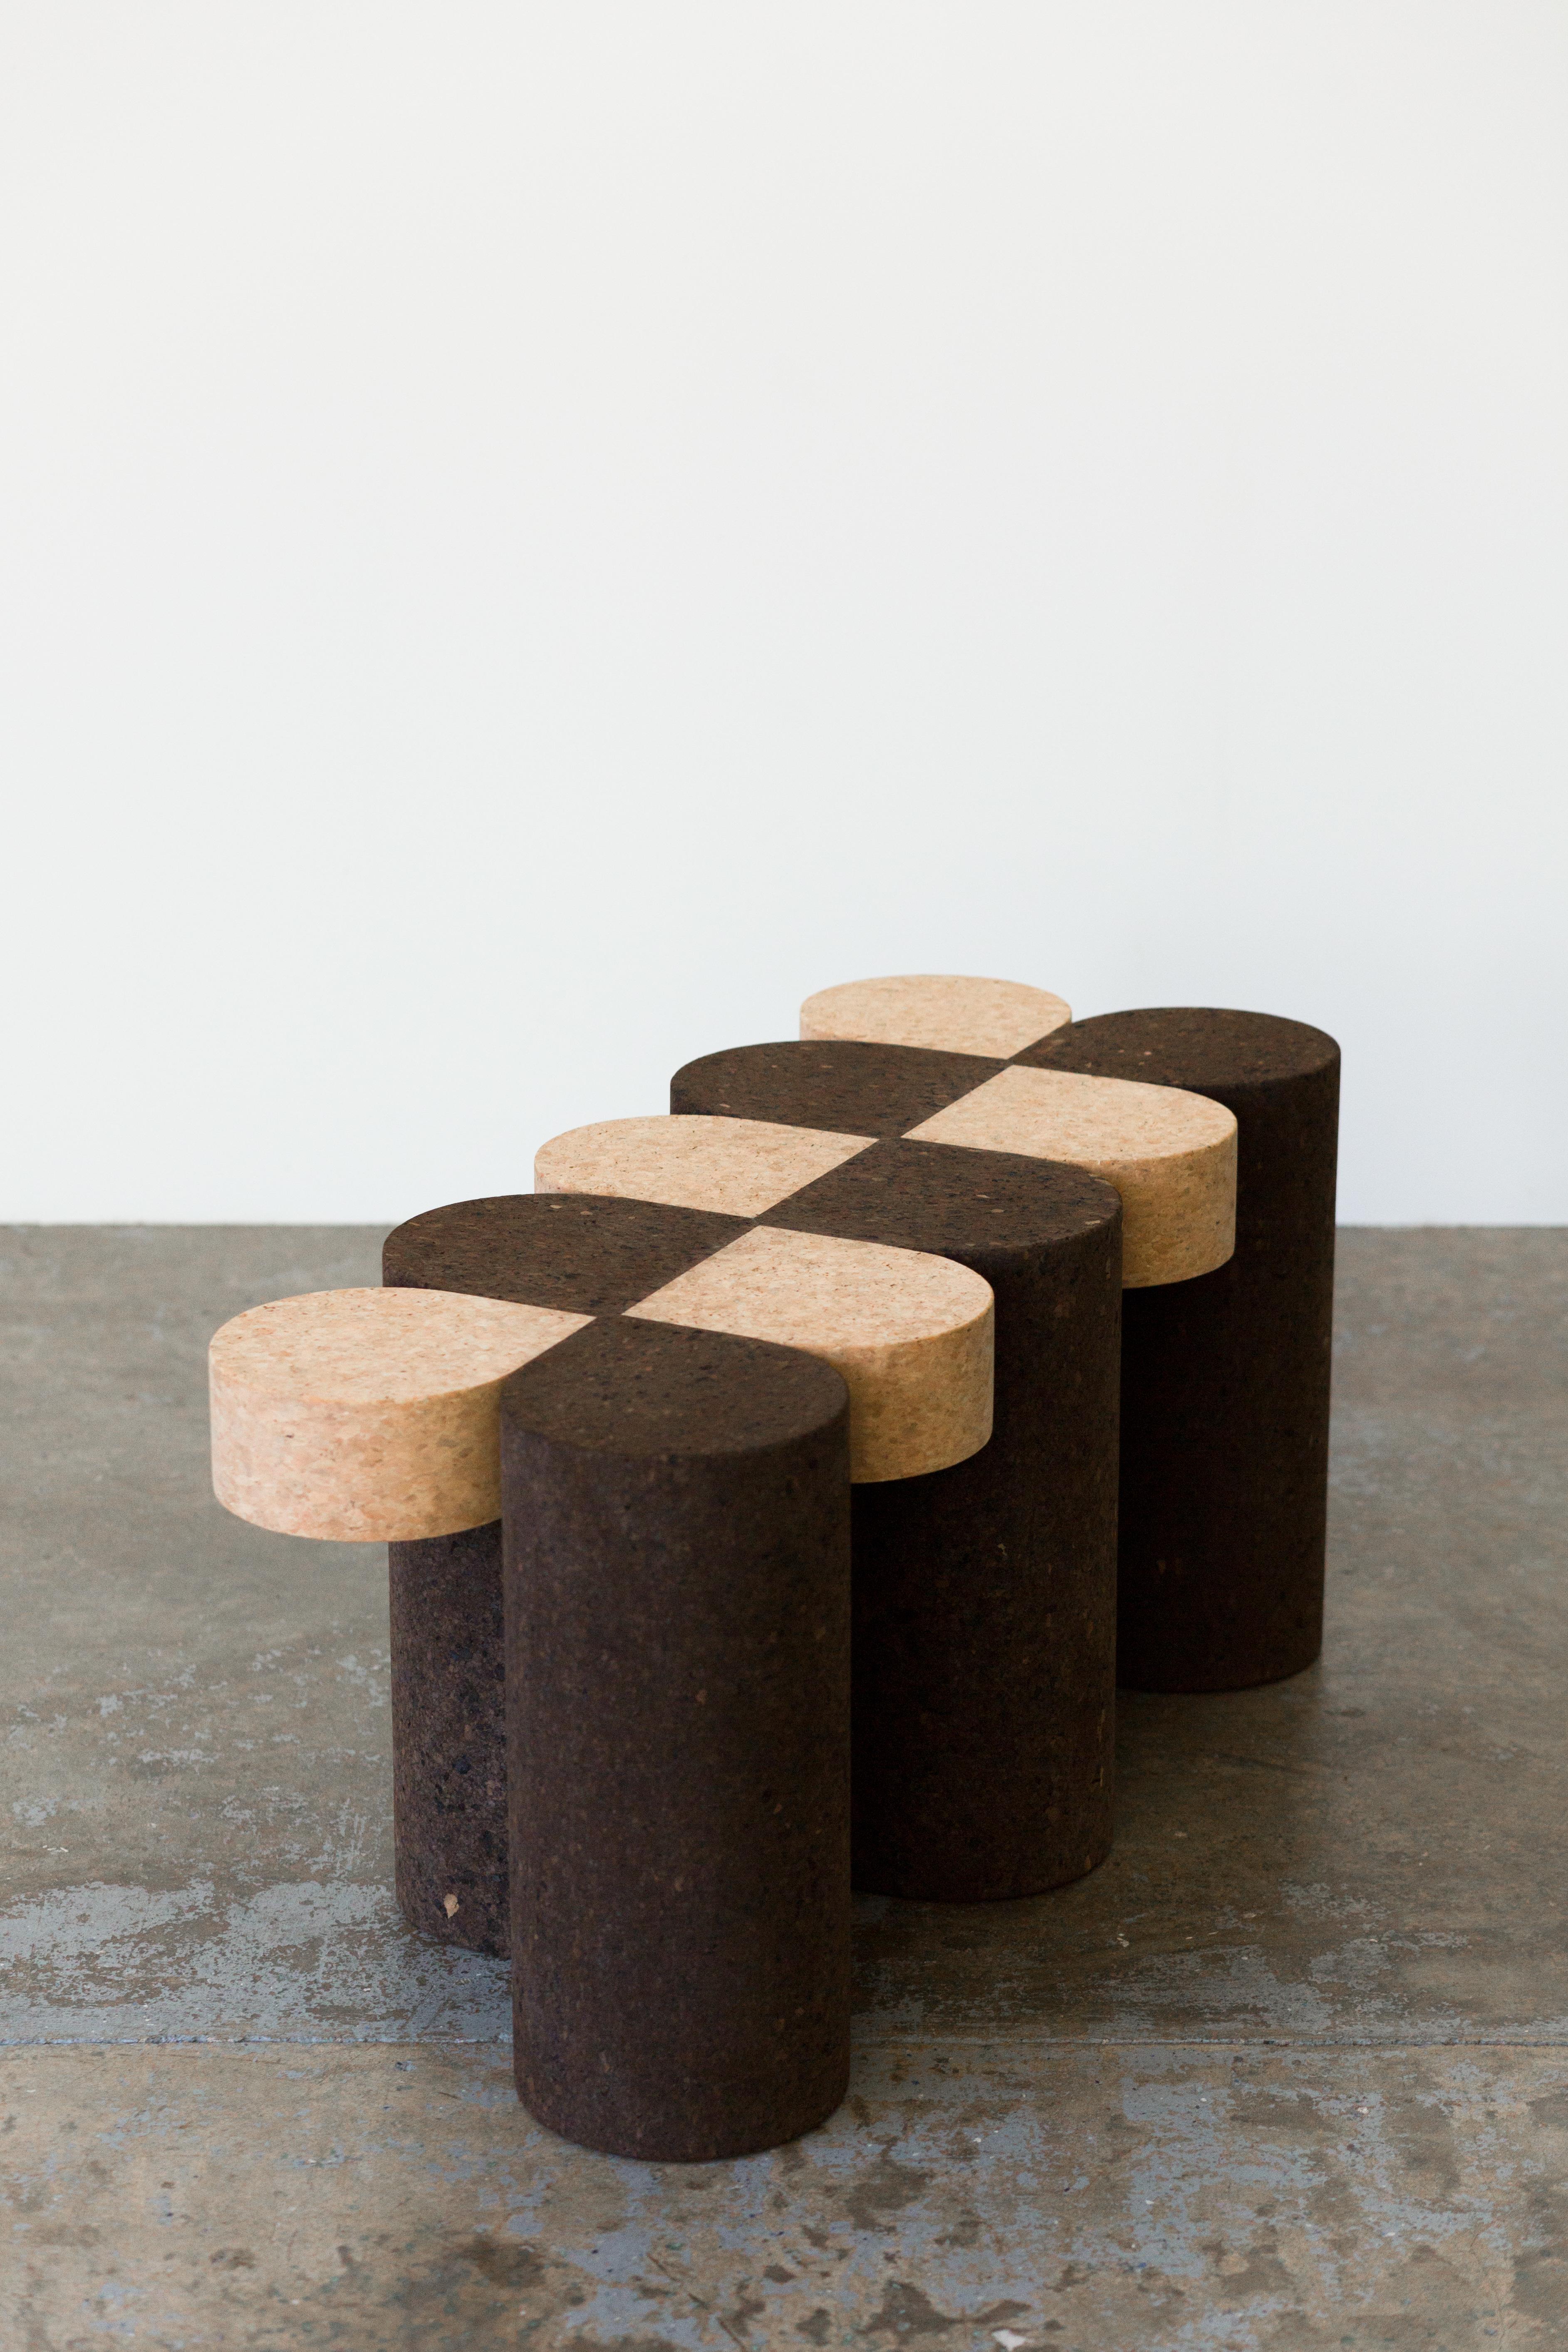 A realization of meticulous research, this piece is part of a collection that highlights the formal longevity and environmental sustainability of Mediterranean cork.

Monolithic and inviting, it is cut from the cylindrical forms that are standard